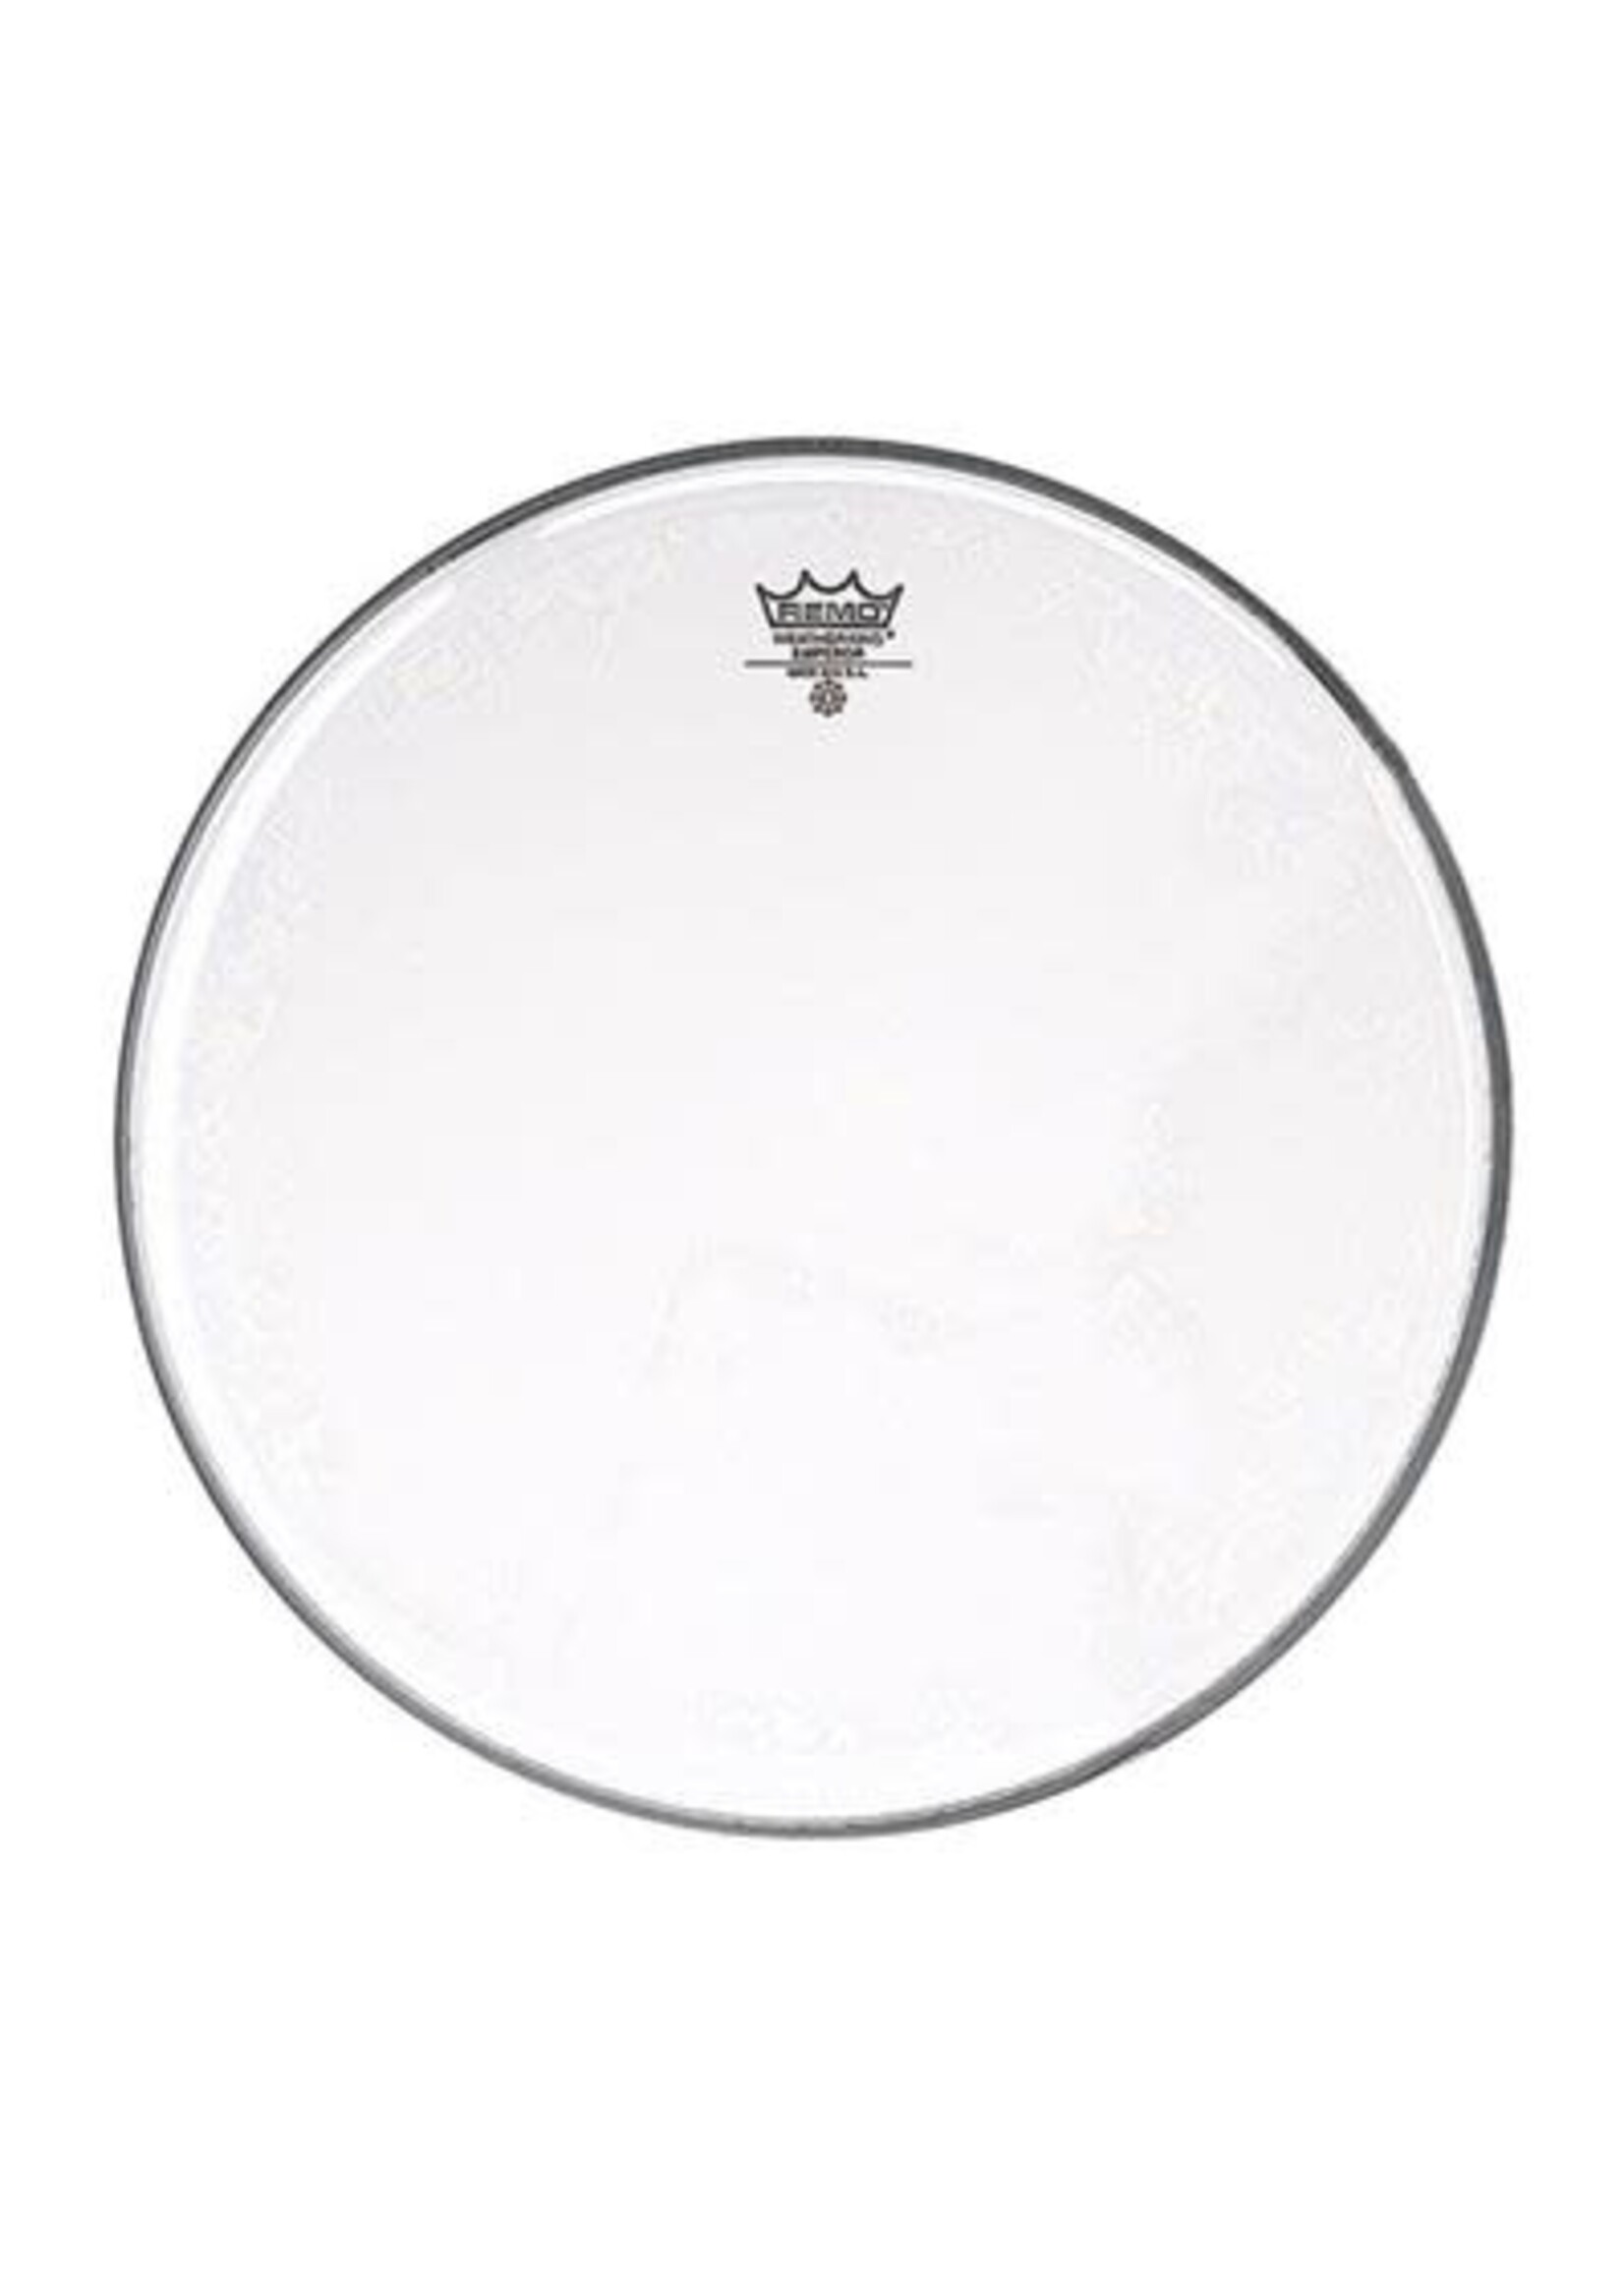 Remo Remo BE-0314-00 Batter, Emperor, Clear, 14" Drum Head